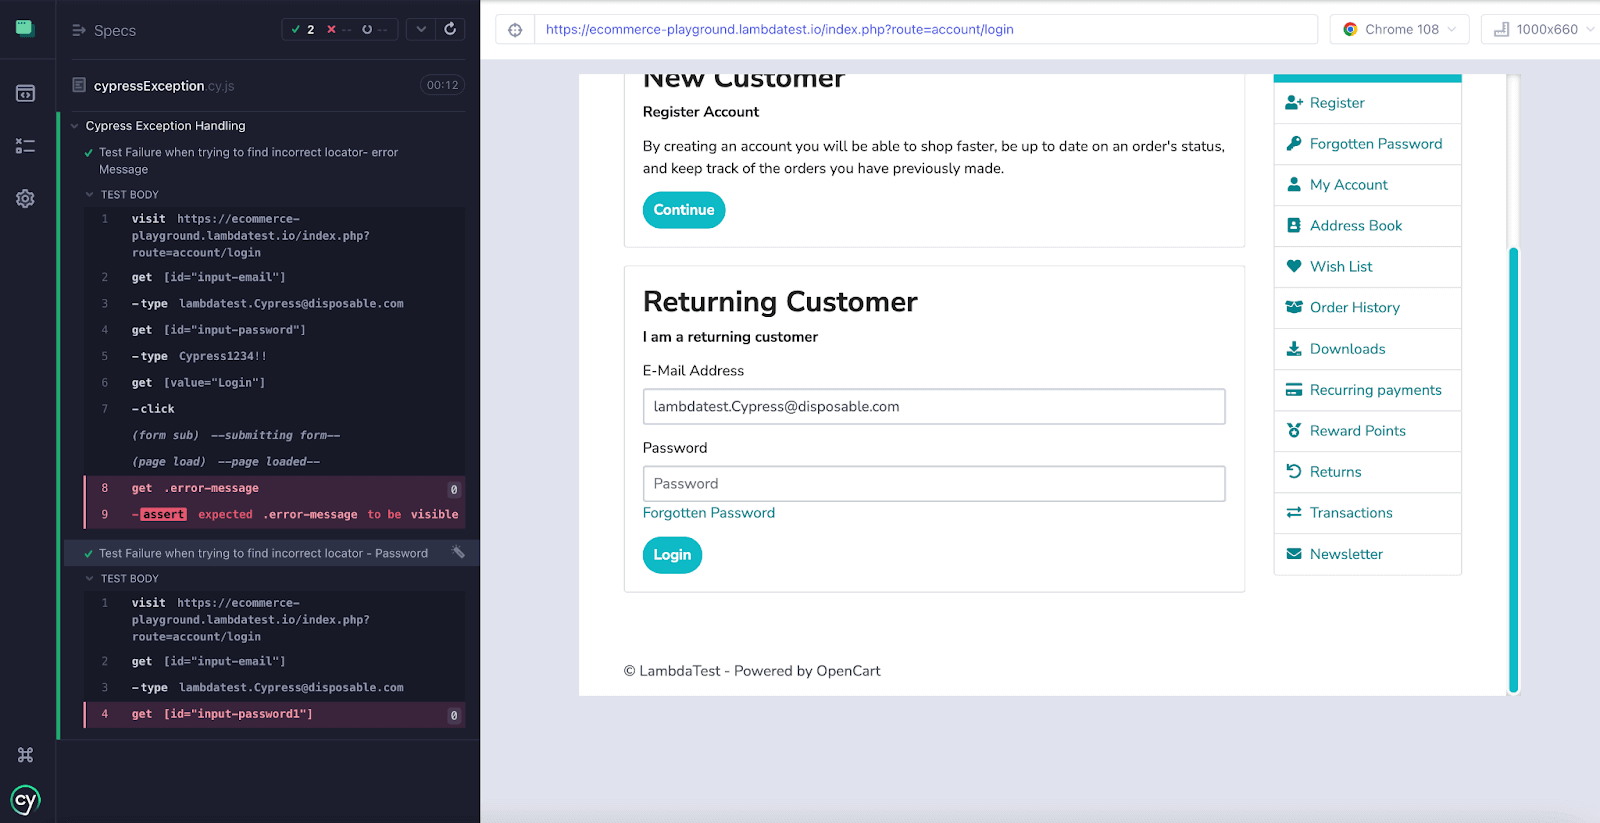 returning customers page